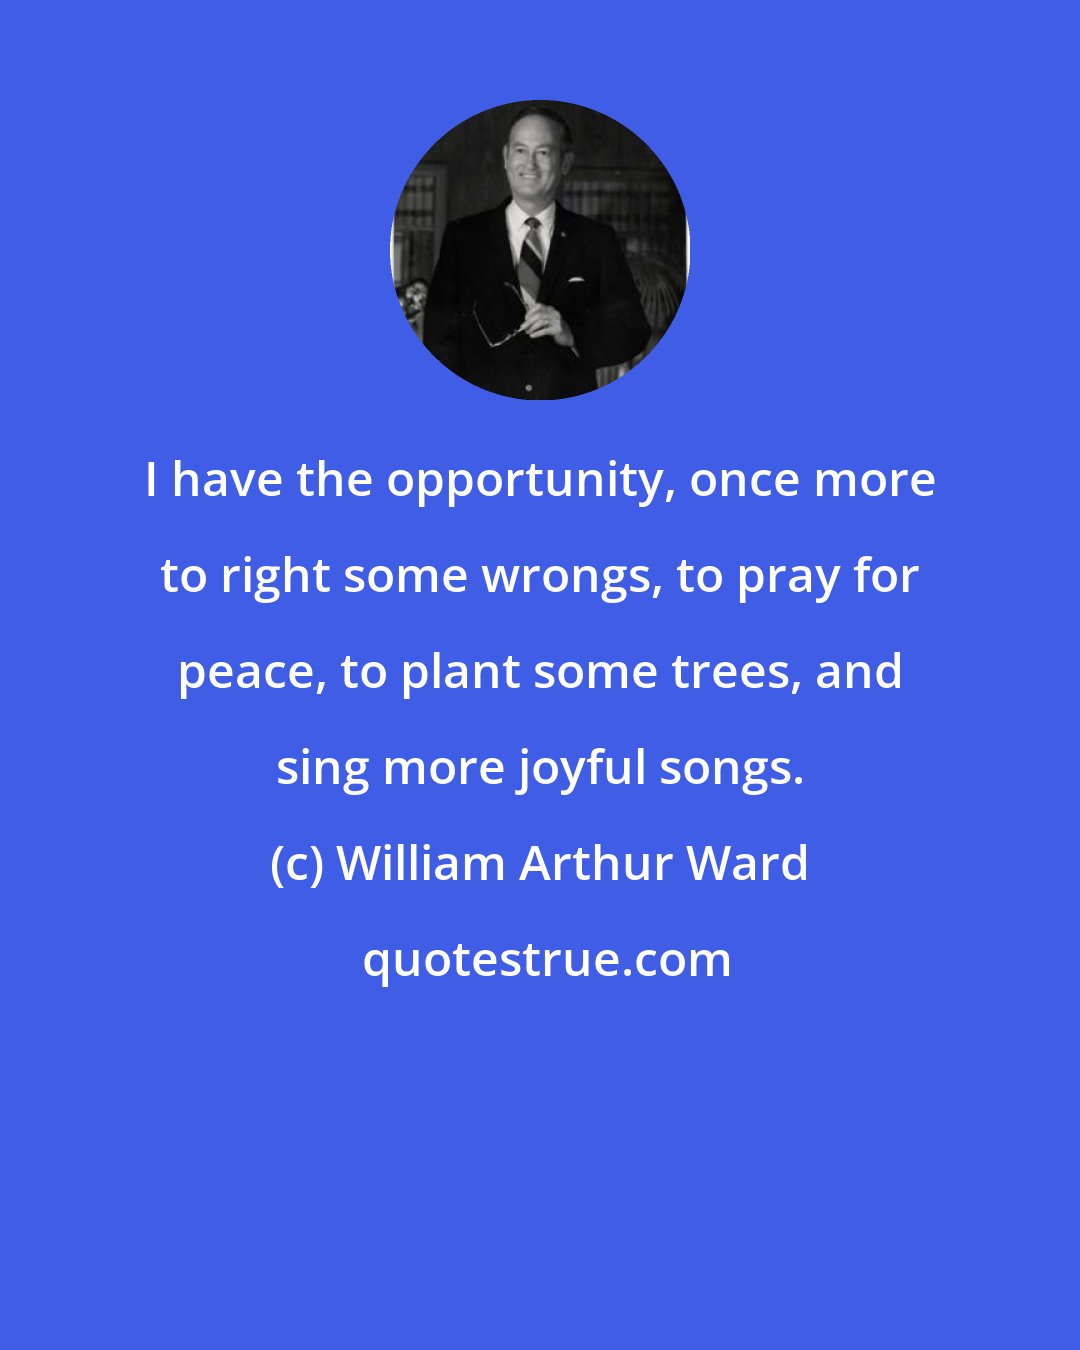 William Arthur Ward: I have the opportunity, once more to right some wrongs, to pray for peace, to plant some trees, and sing more joyful songs.